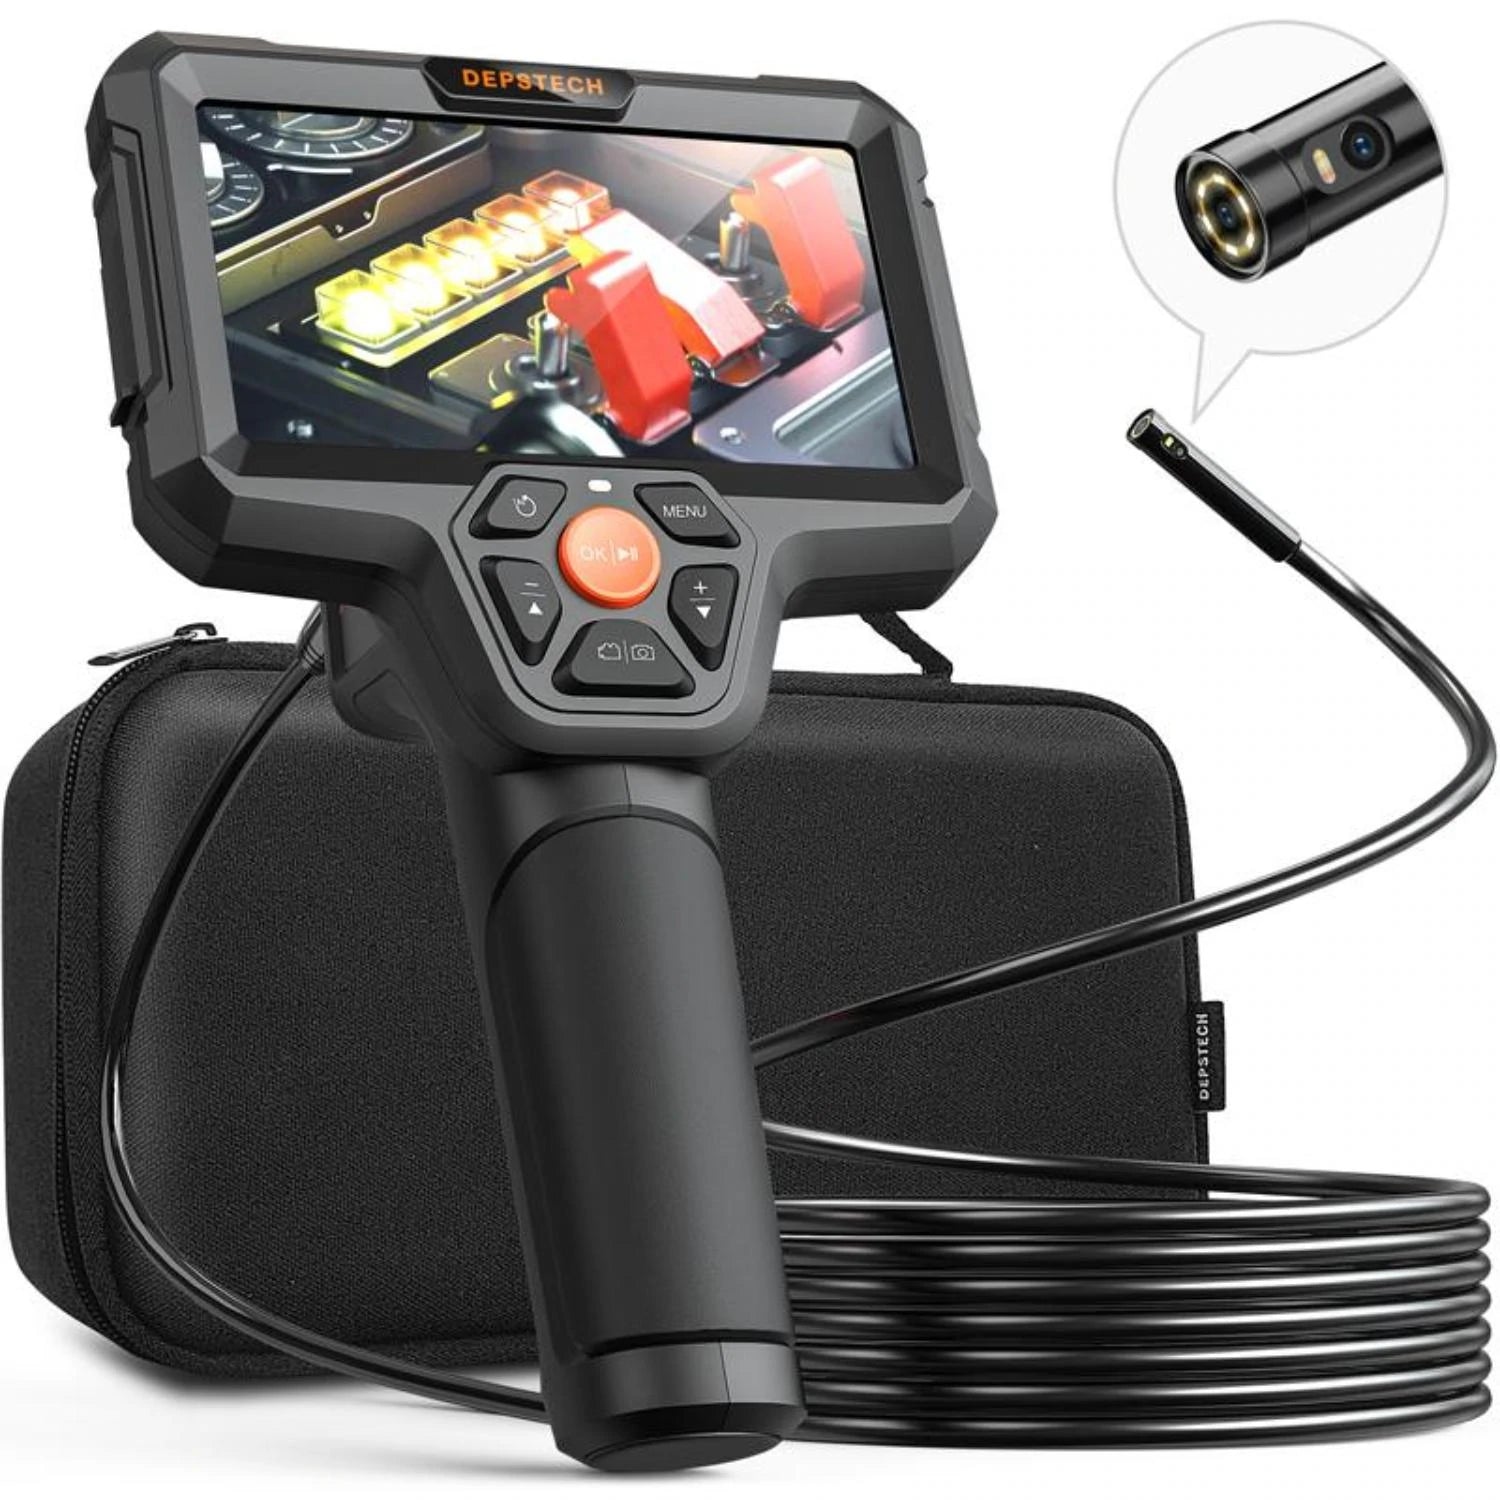 Triple Lens Endoscope with Light, Teslong 4.5inch HD Snake